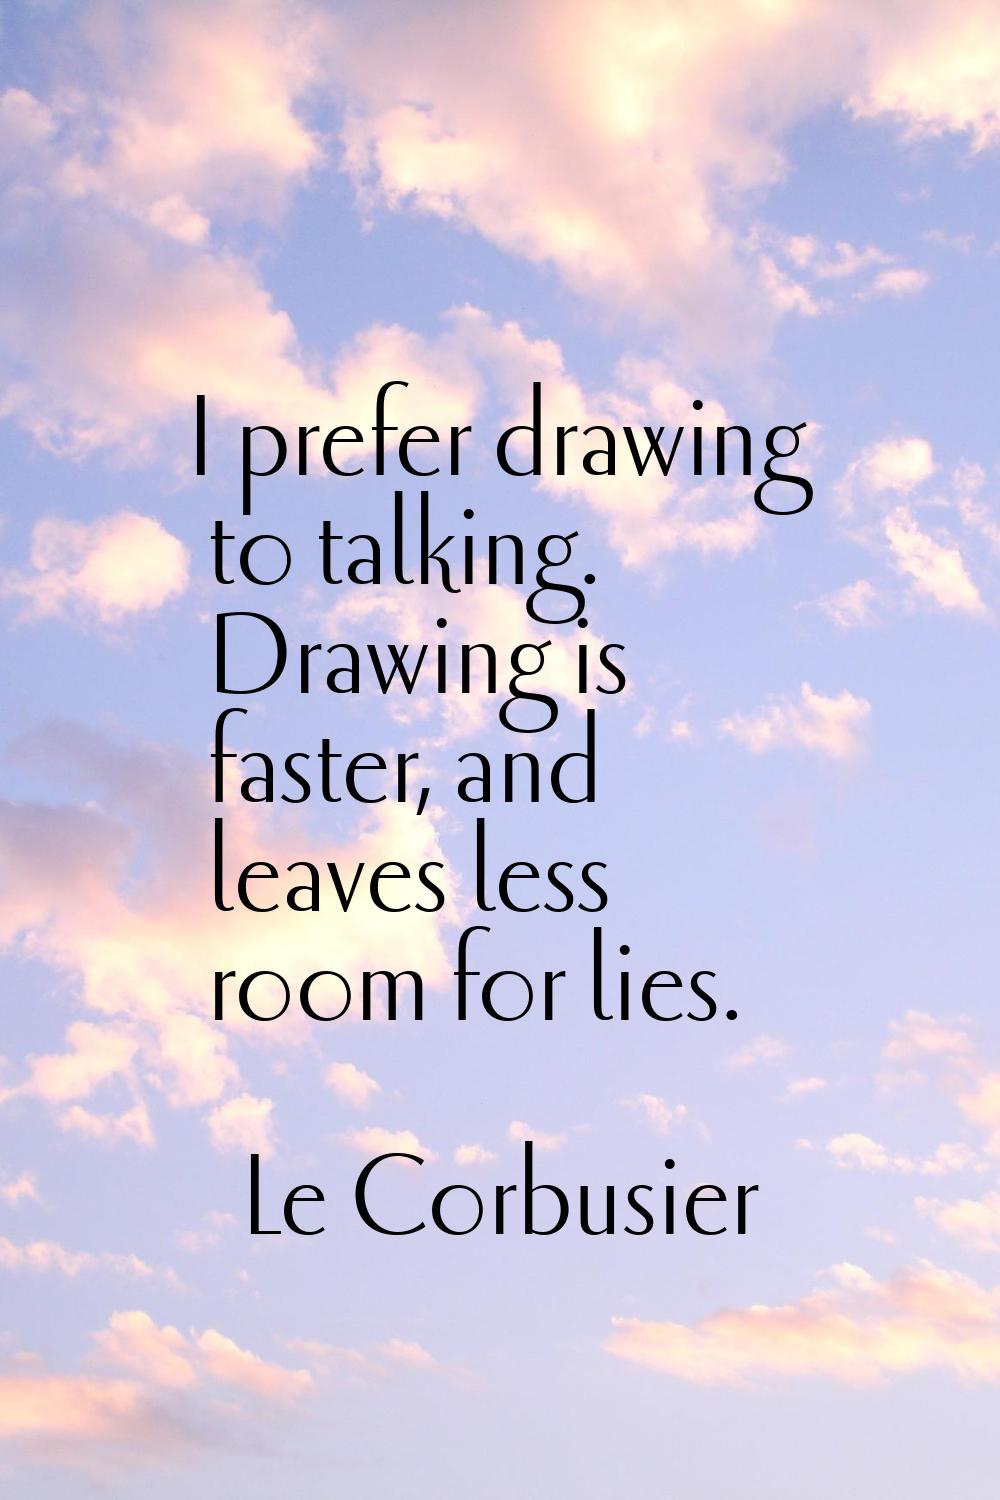 I prefer drawing to talking. Drawing is faster, and leaves less room for lies.